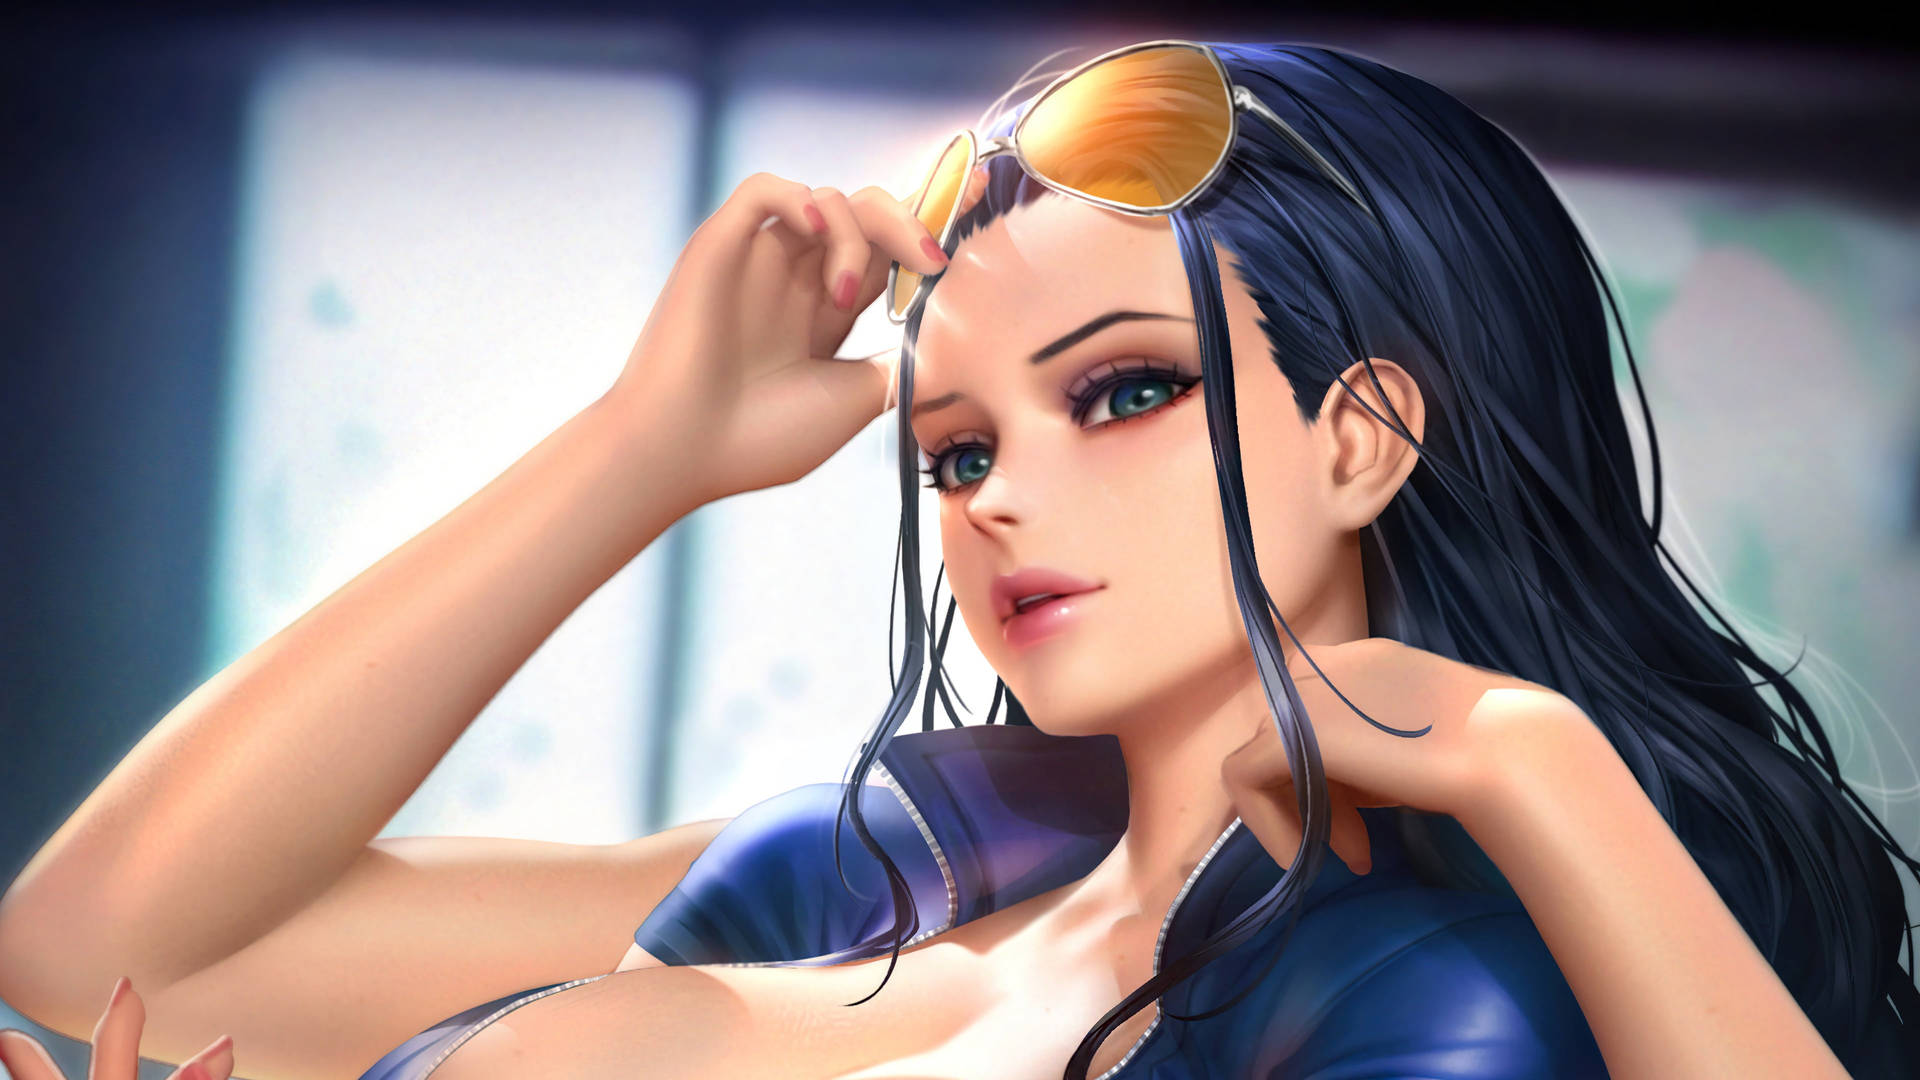 Nico Robin One Piece Shades On Forehead Background